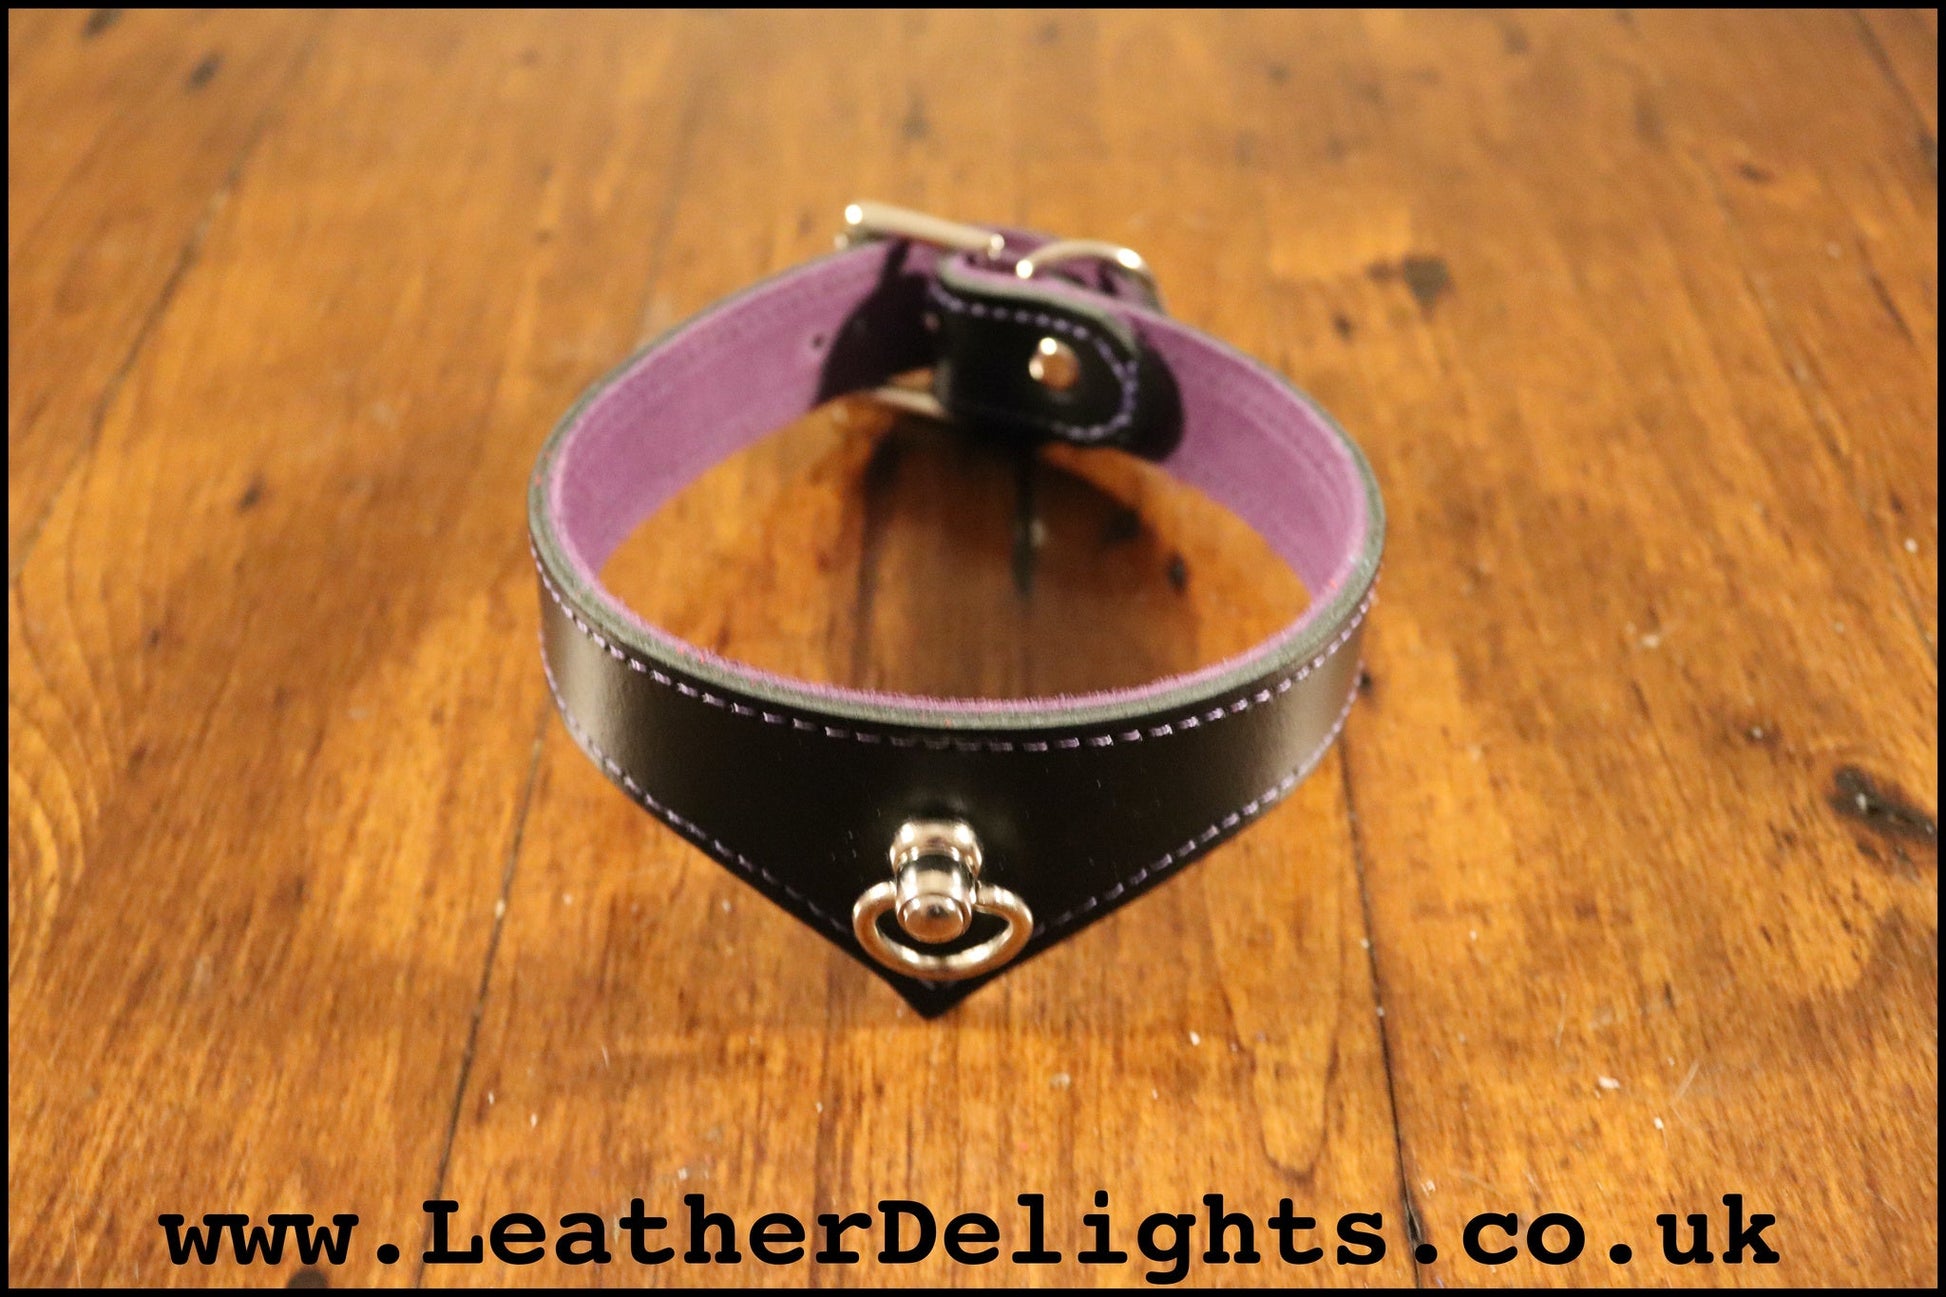 1" Wide Collar with Swivel Ring - Leather Delights